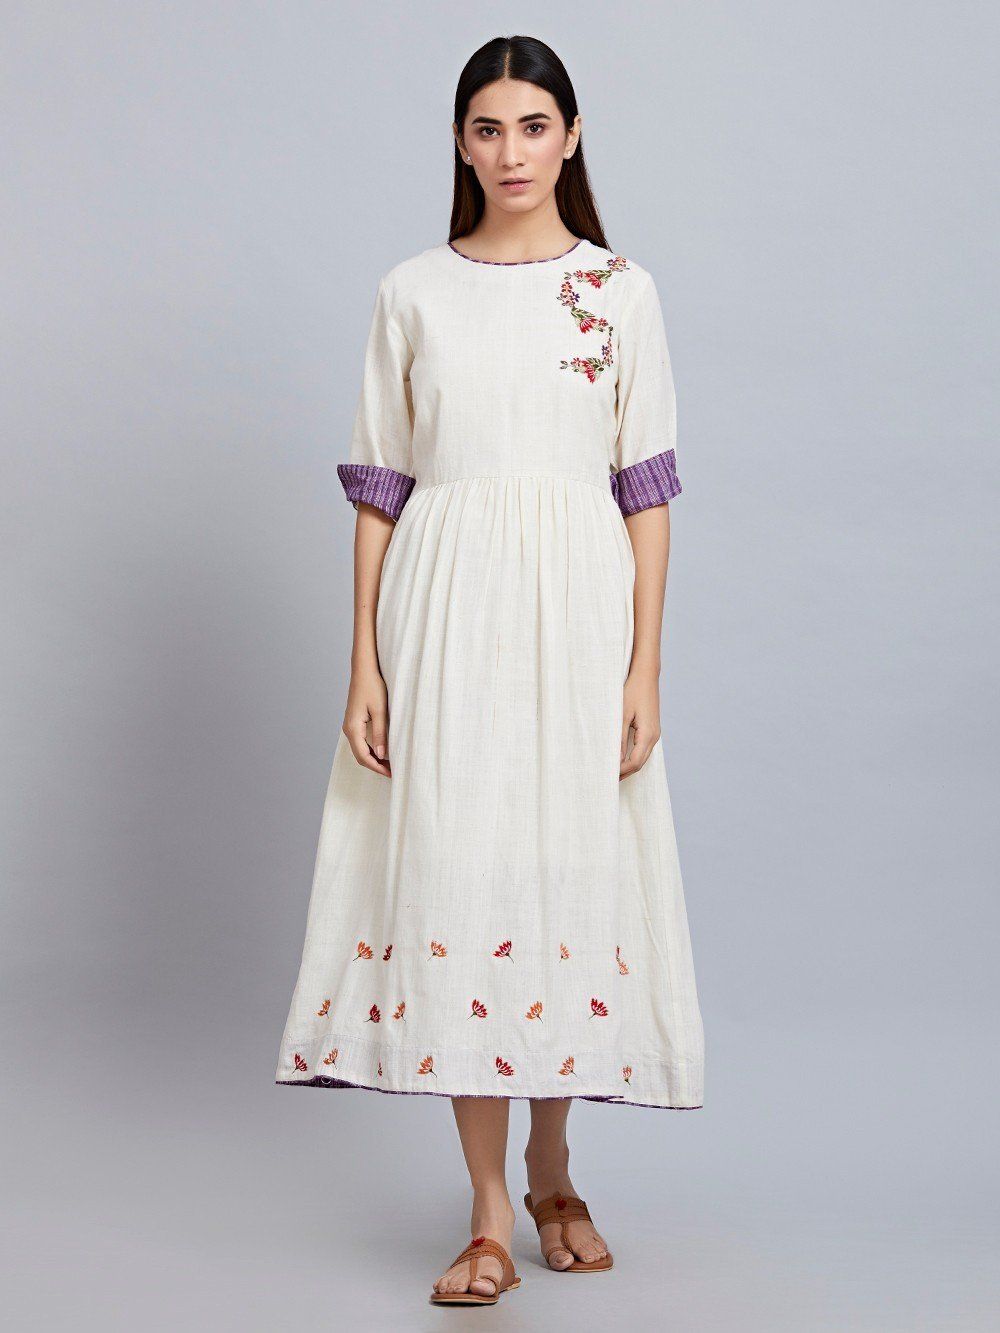 Buy Serene White Floral Embroidered Maxi Dress Dress for 